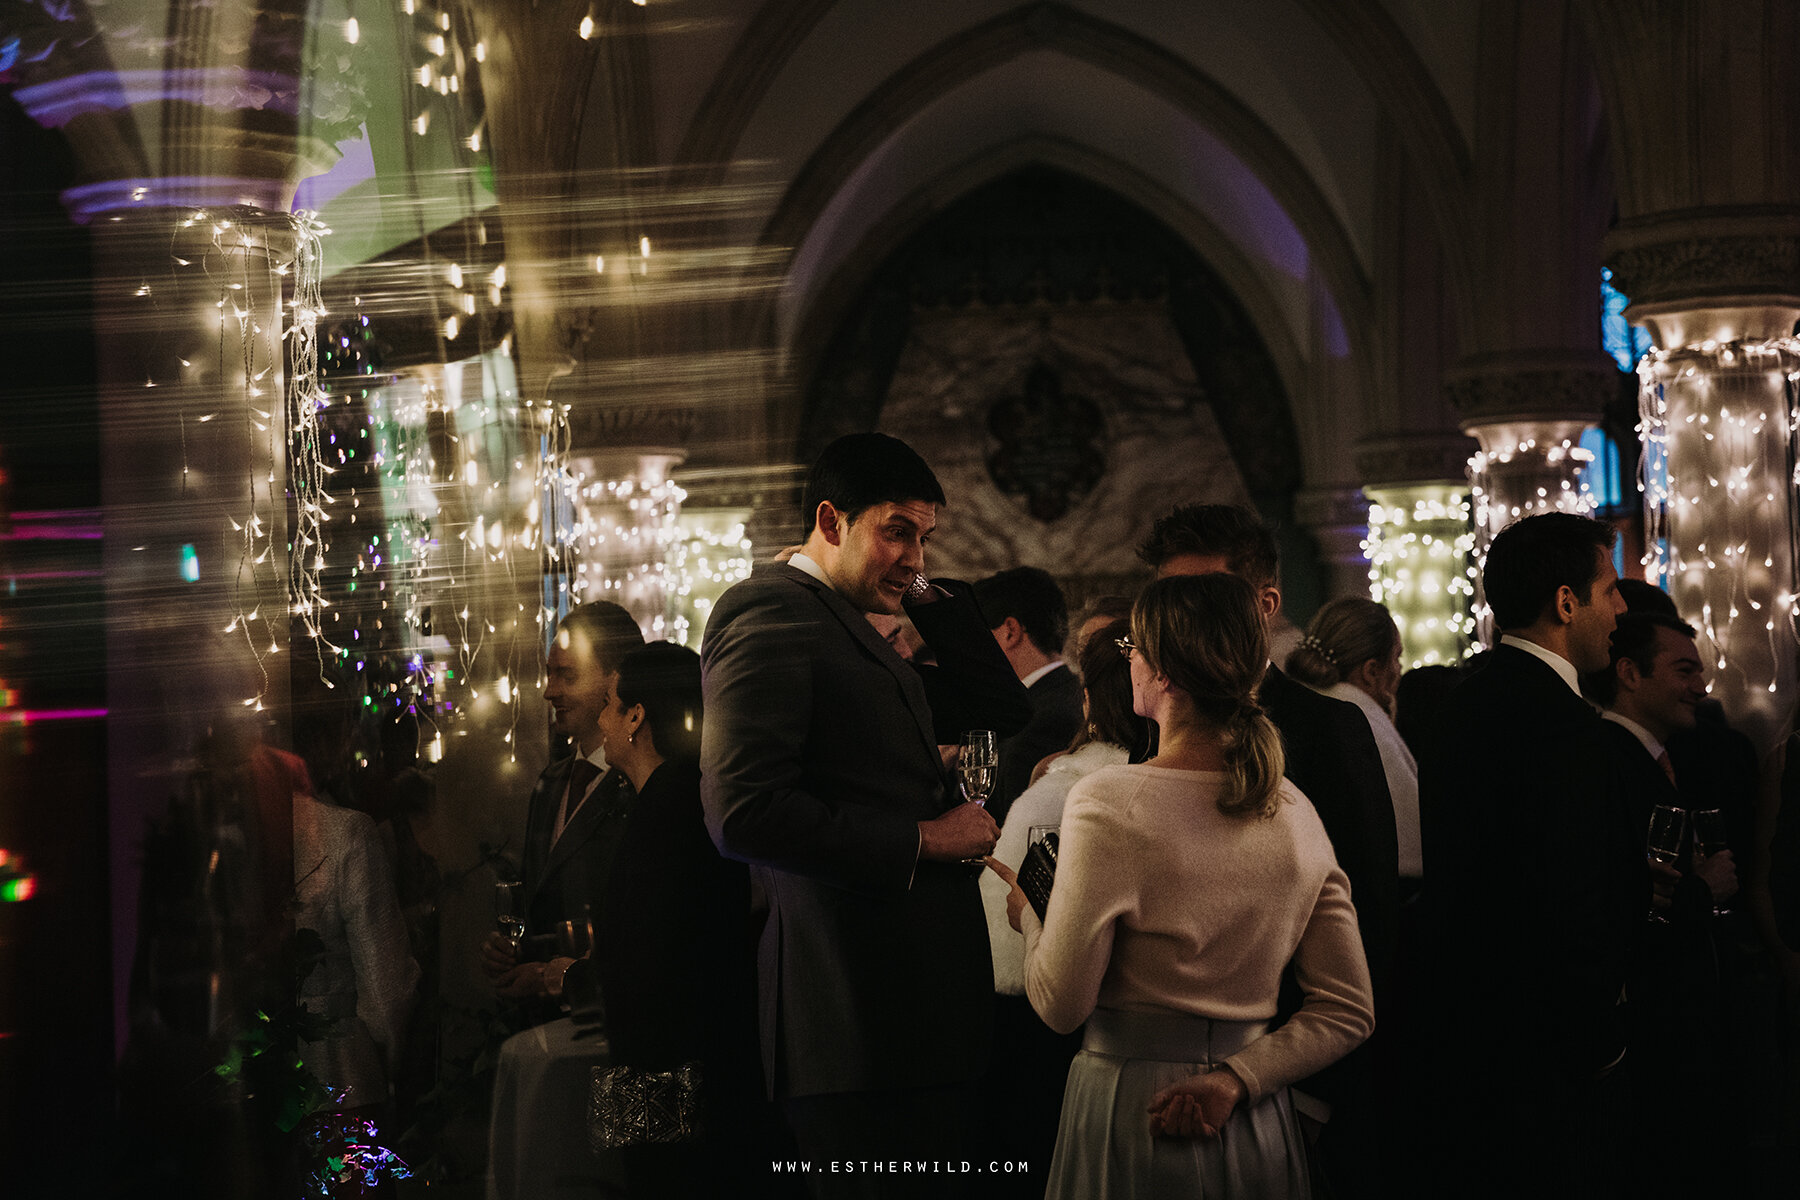 Wootton_House_Dorking_Guildford_London_Winter_Wedding_Photography_Copyright_Esther_Wild_Photographer_IMG_1470.jpg